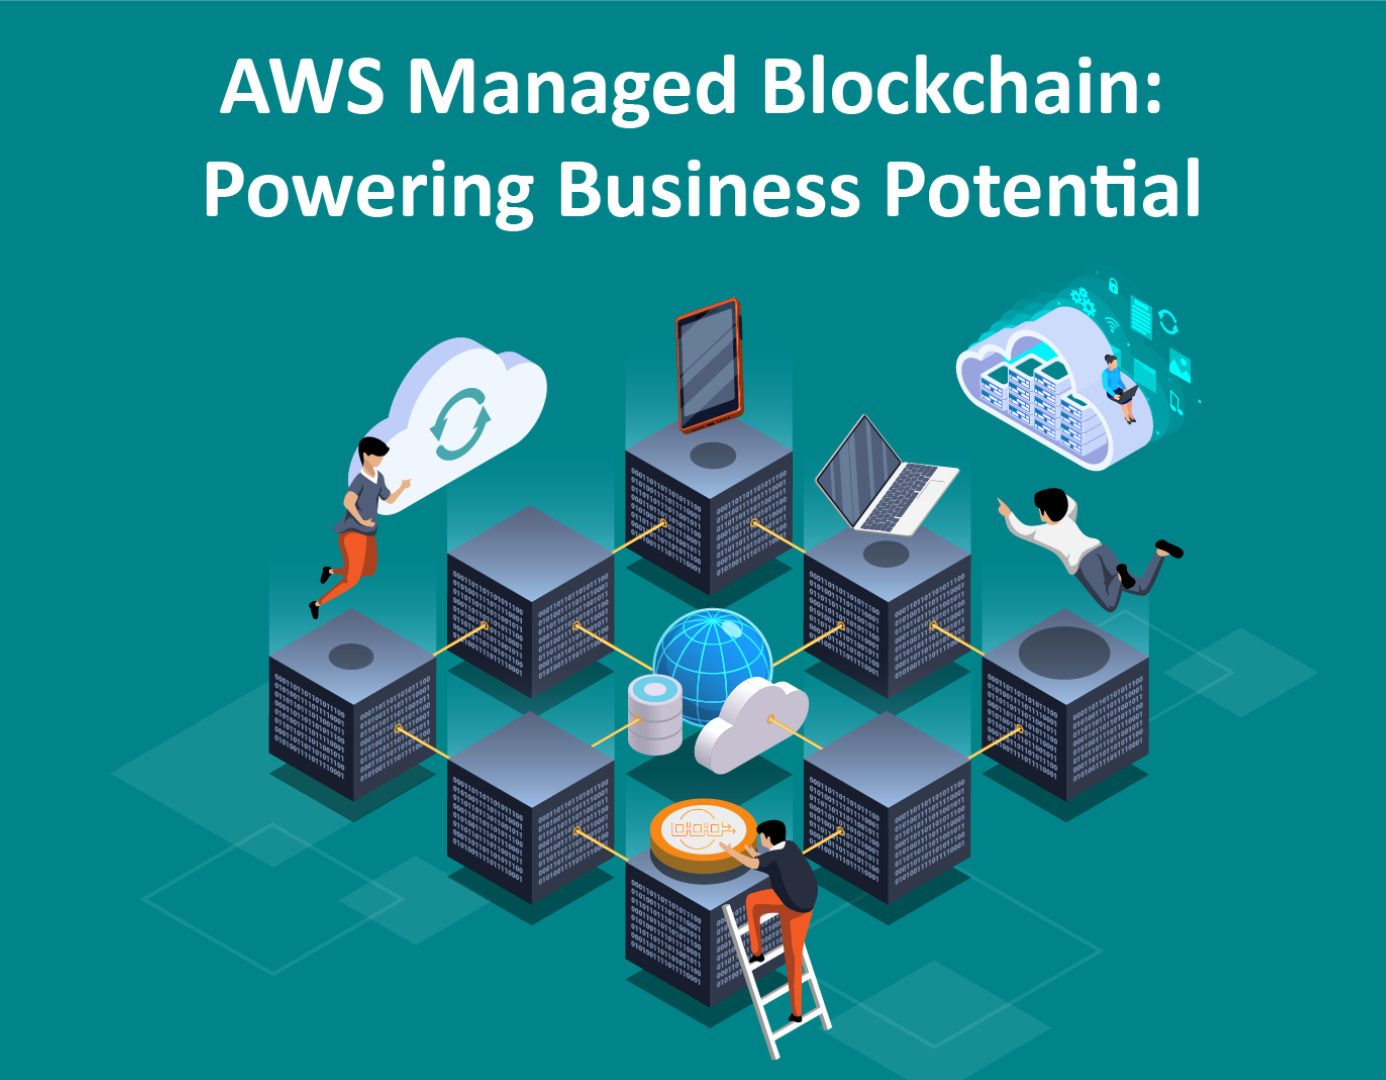 AWS Managed Blockchain: Powering Business Potential